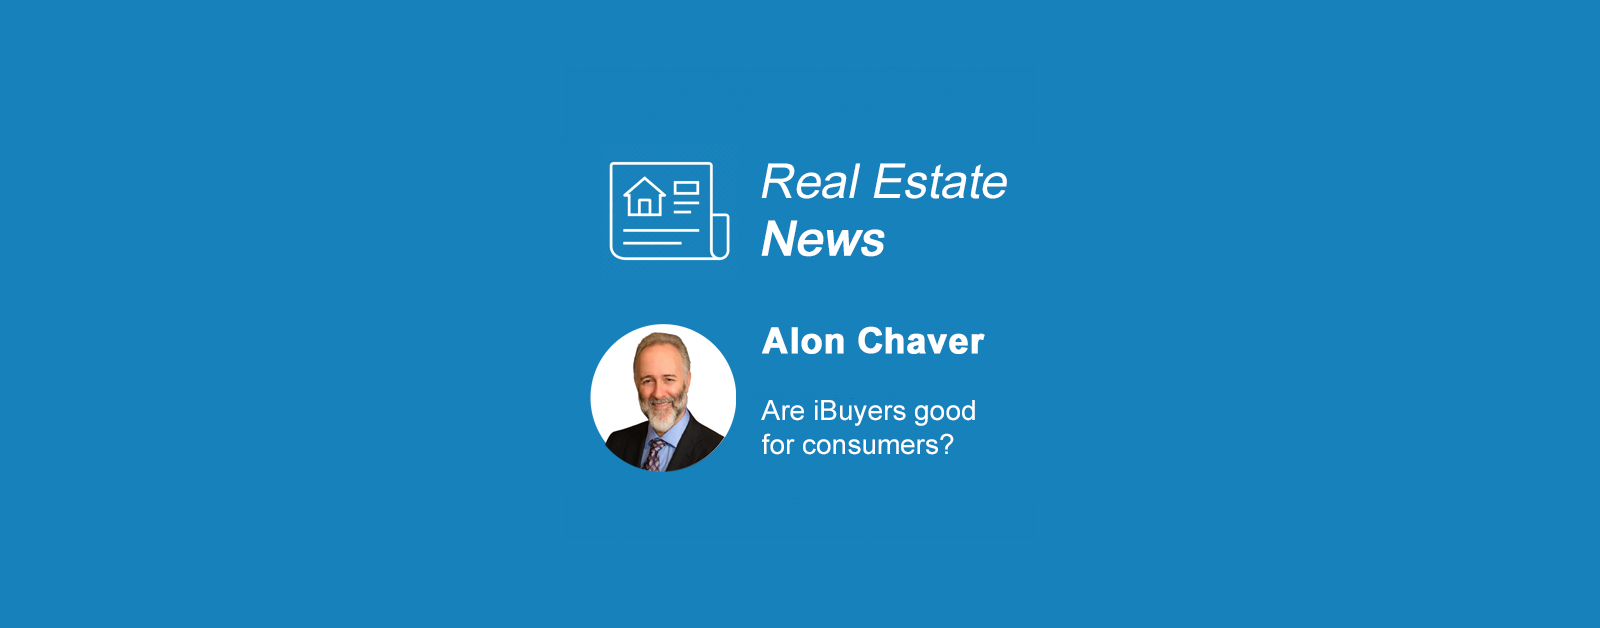 iBuyers: Are they good for consumers?